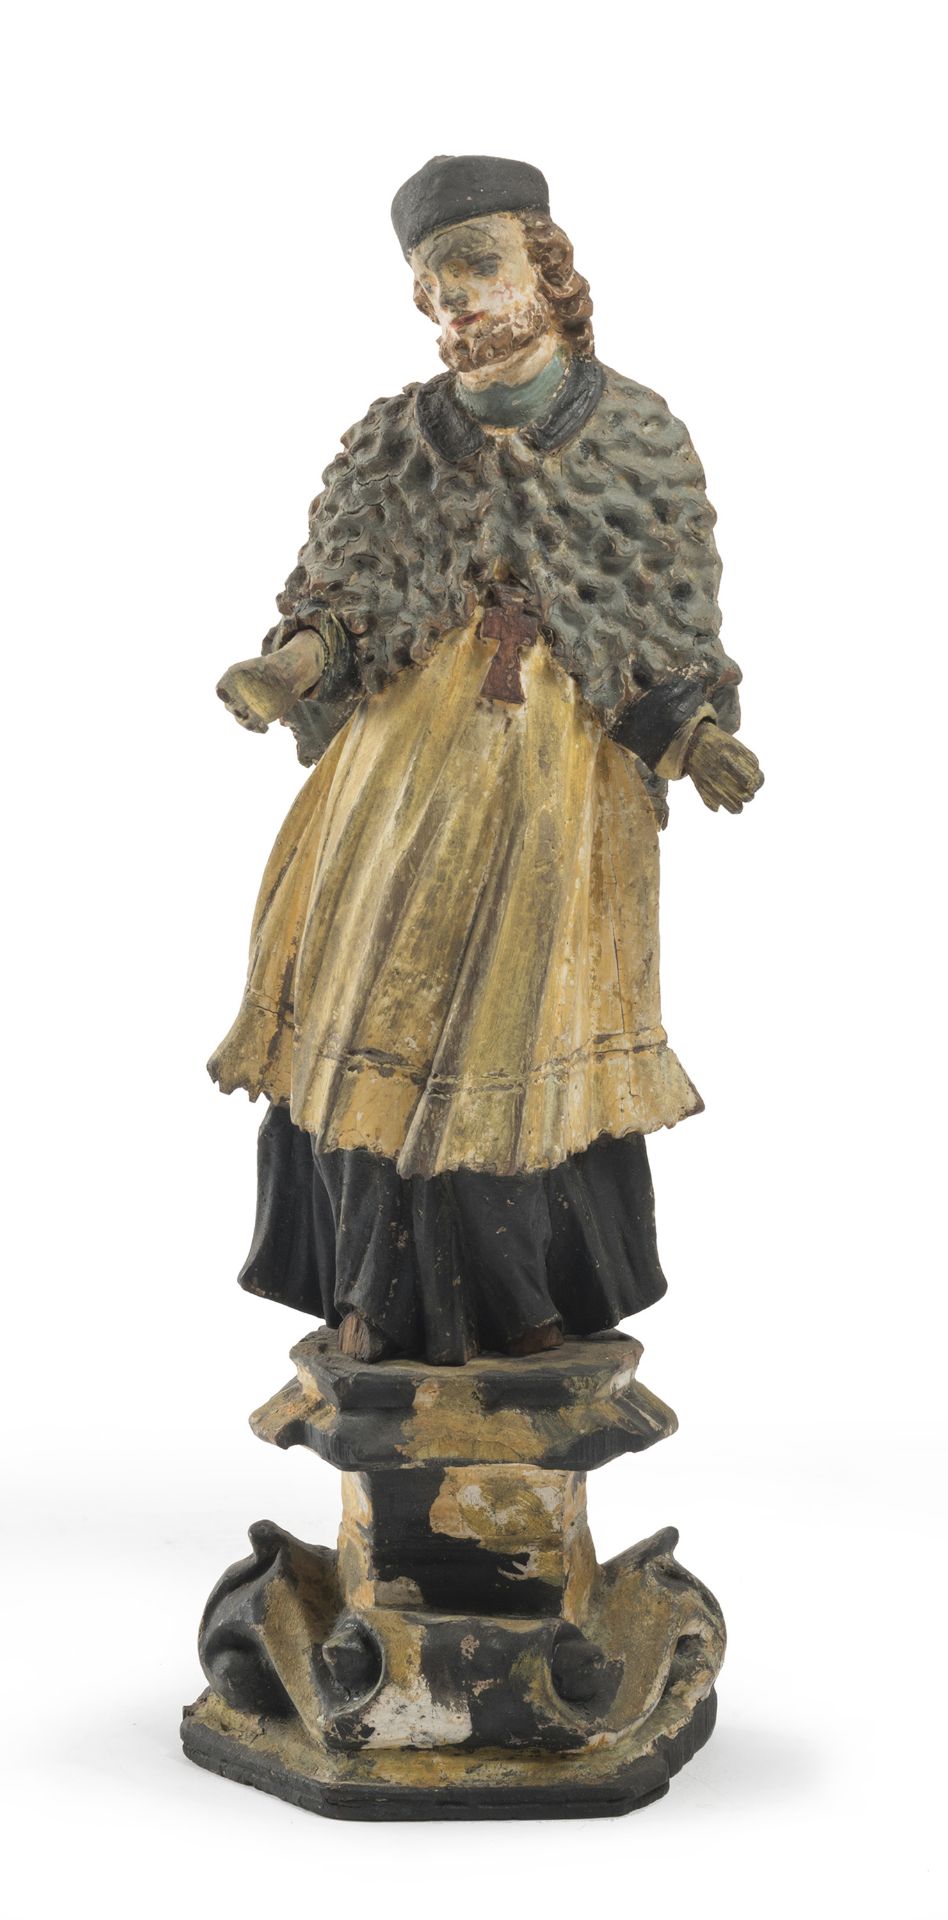 SCULPTURE OF A SAINT SOUTHERN ITALY 18TH CENTURY